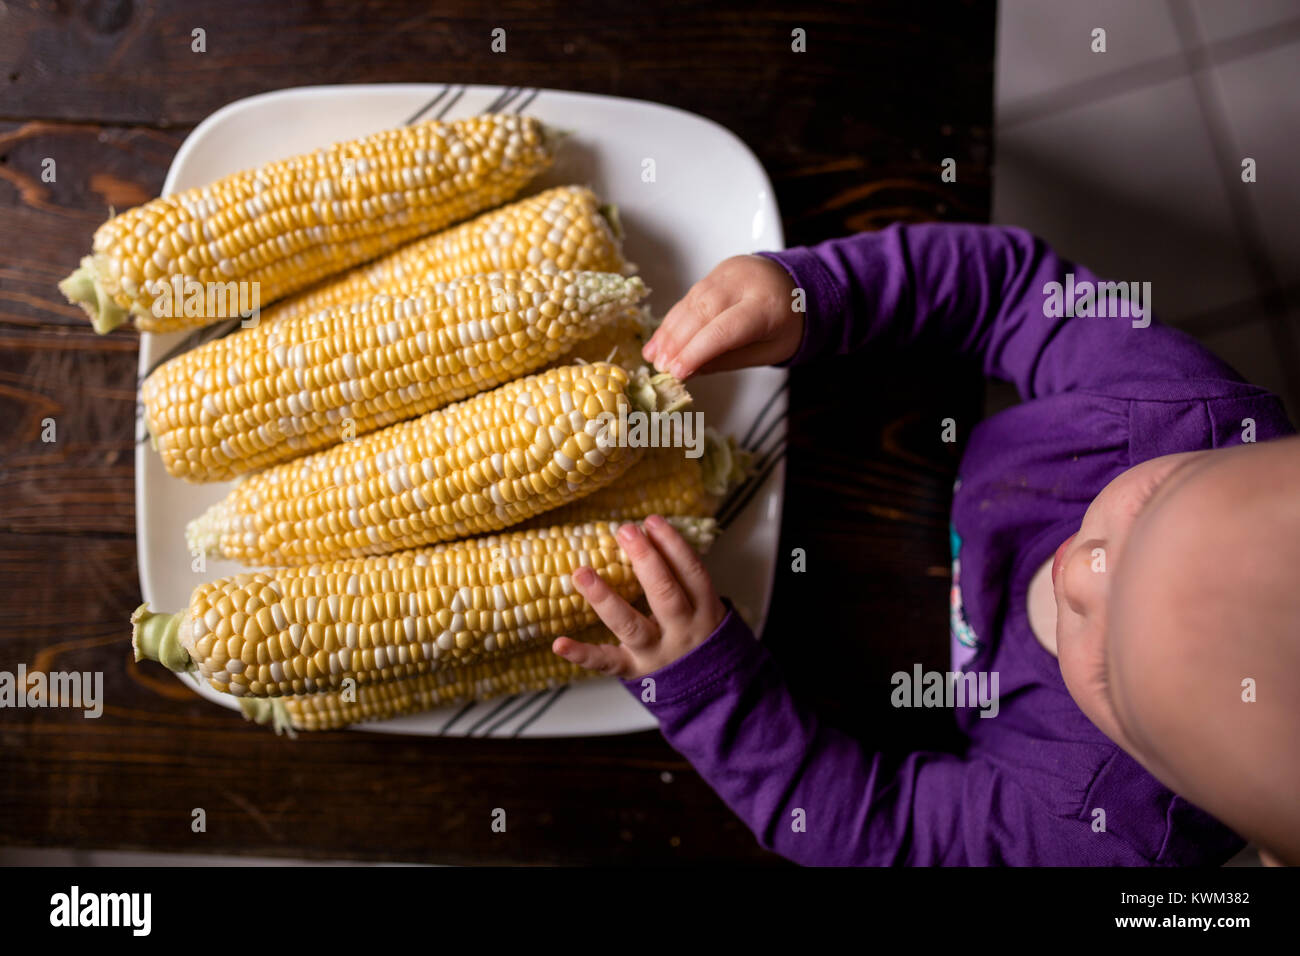 Overhead view of baby girl touching corns in plate on chair Stock Photo